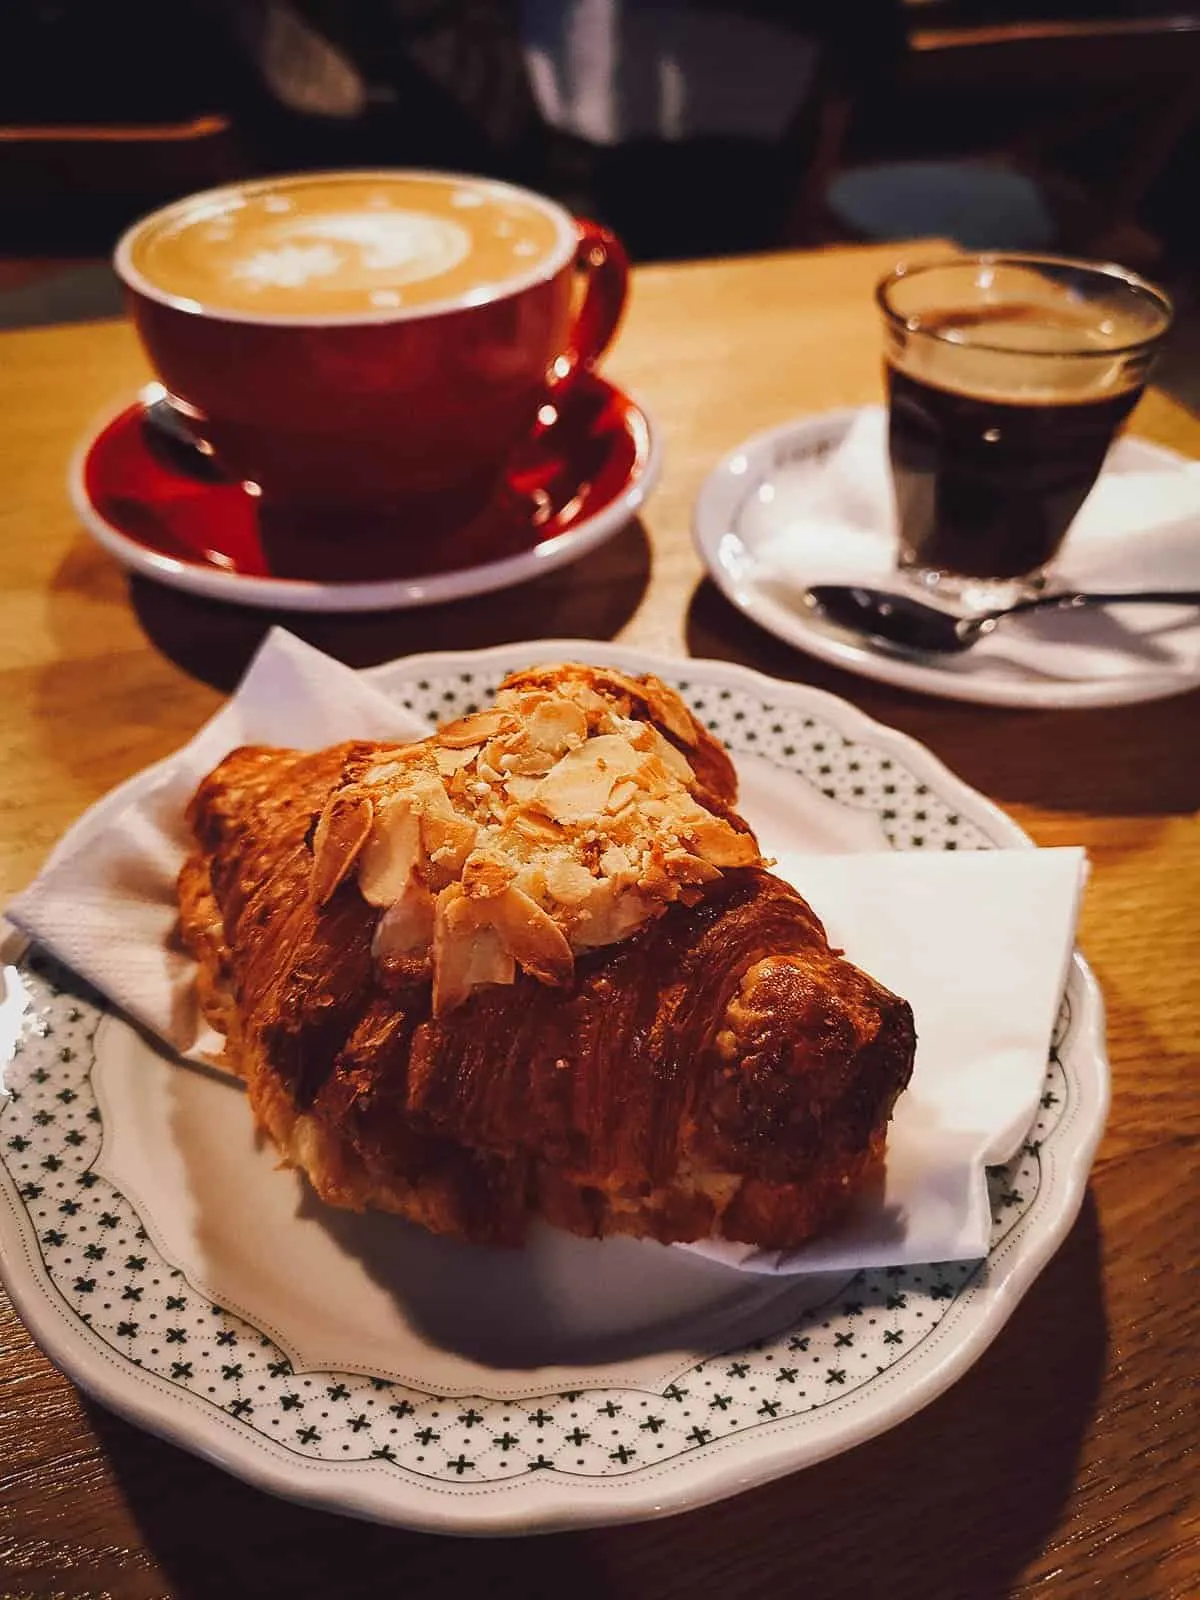 Coffee and croissant at 9BAR cafe in Budapest